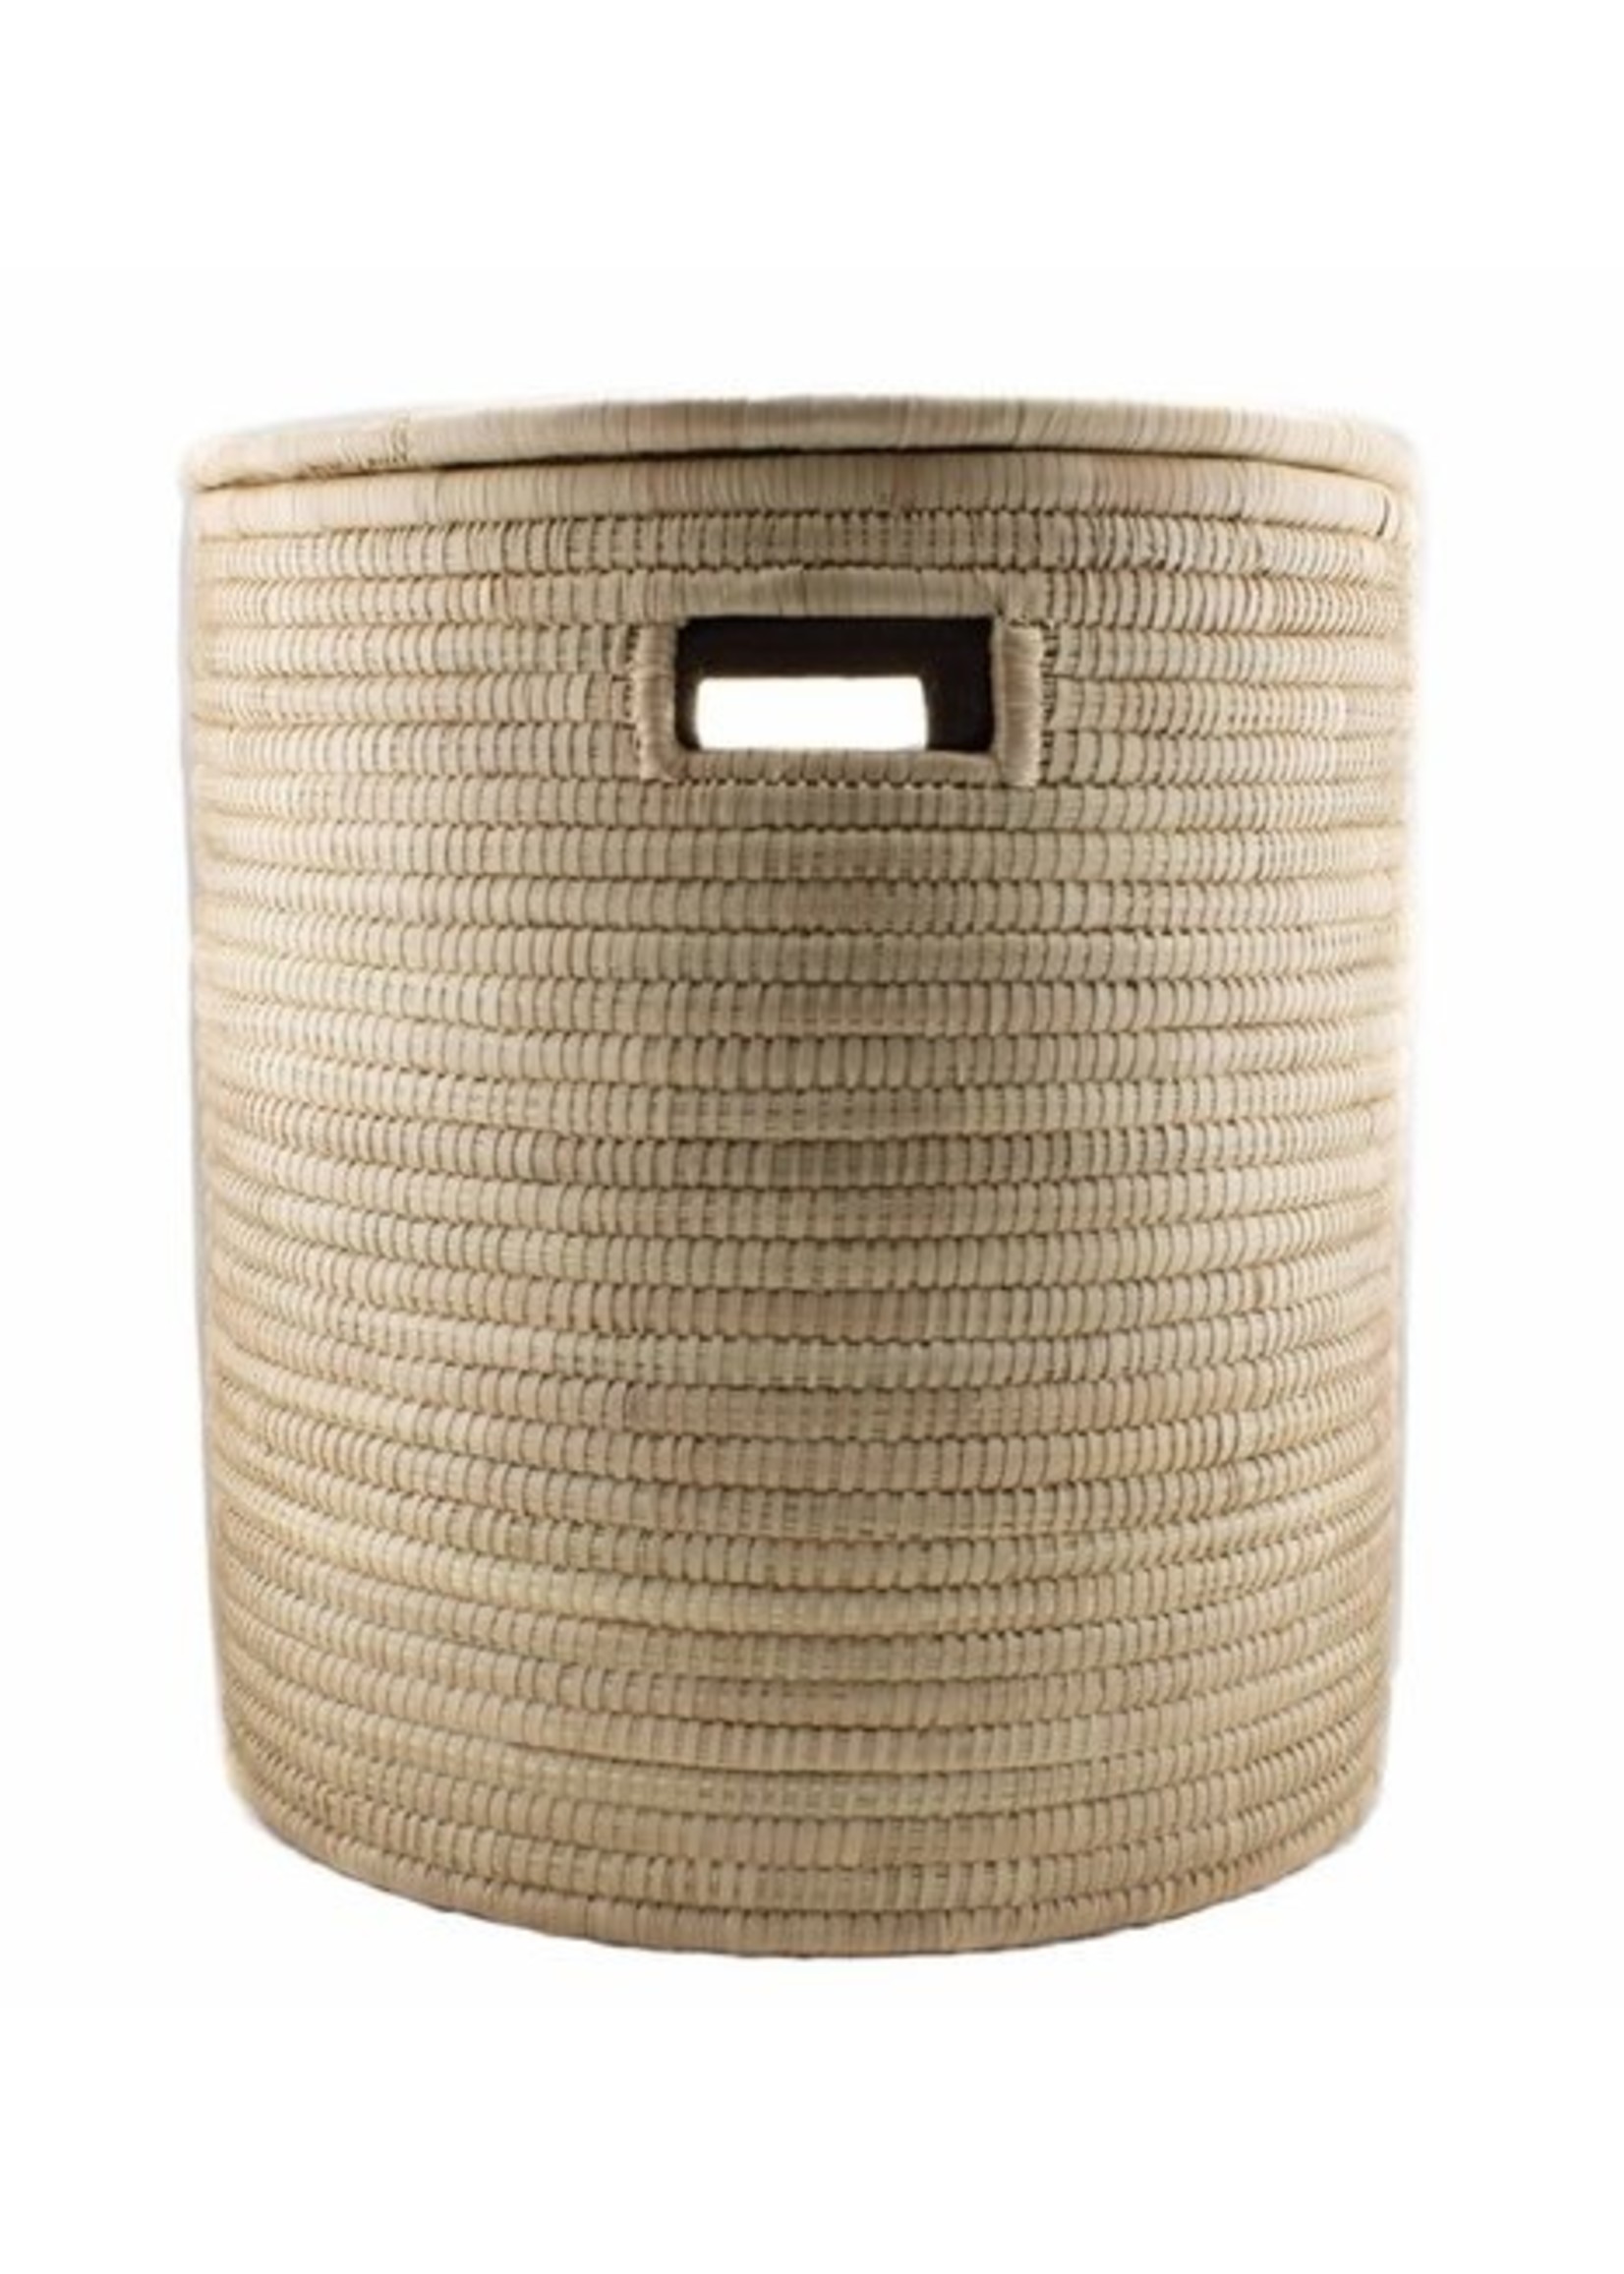 People of the sun Palmleave basket with flat lid Natural H45xD40cm - Medium